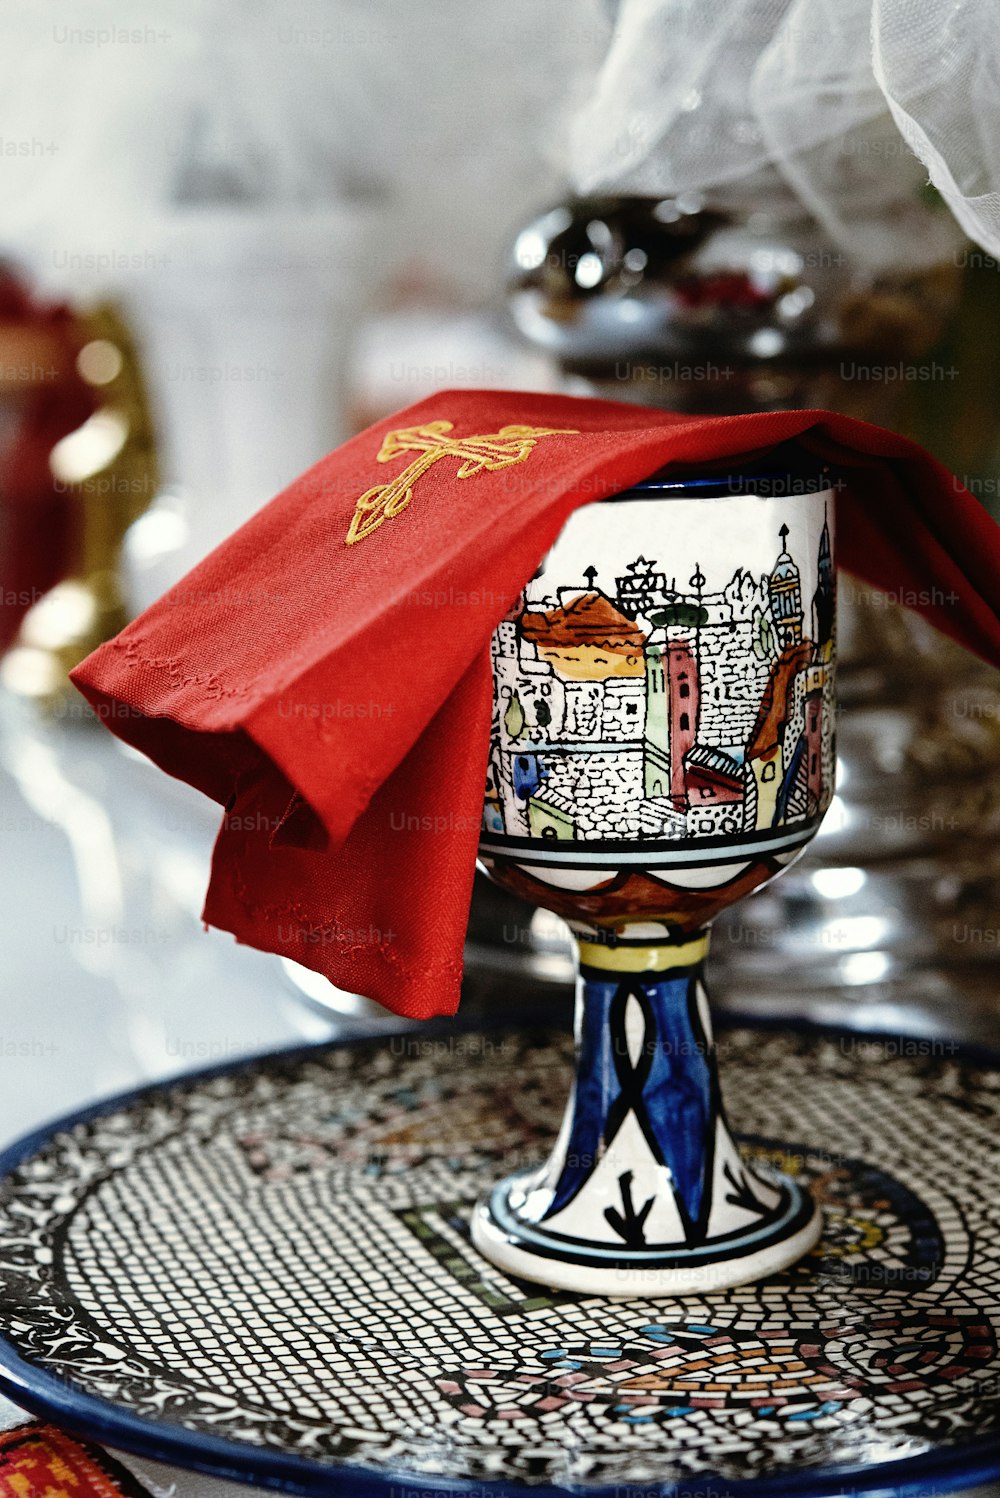 cup in catholic church or cathedral, religion concept, wedding traditional ceremony